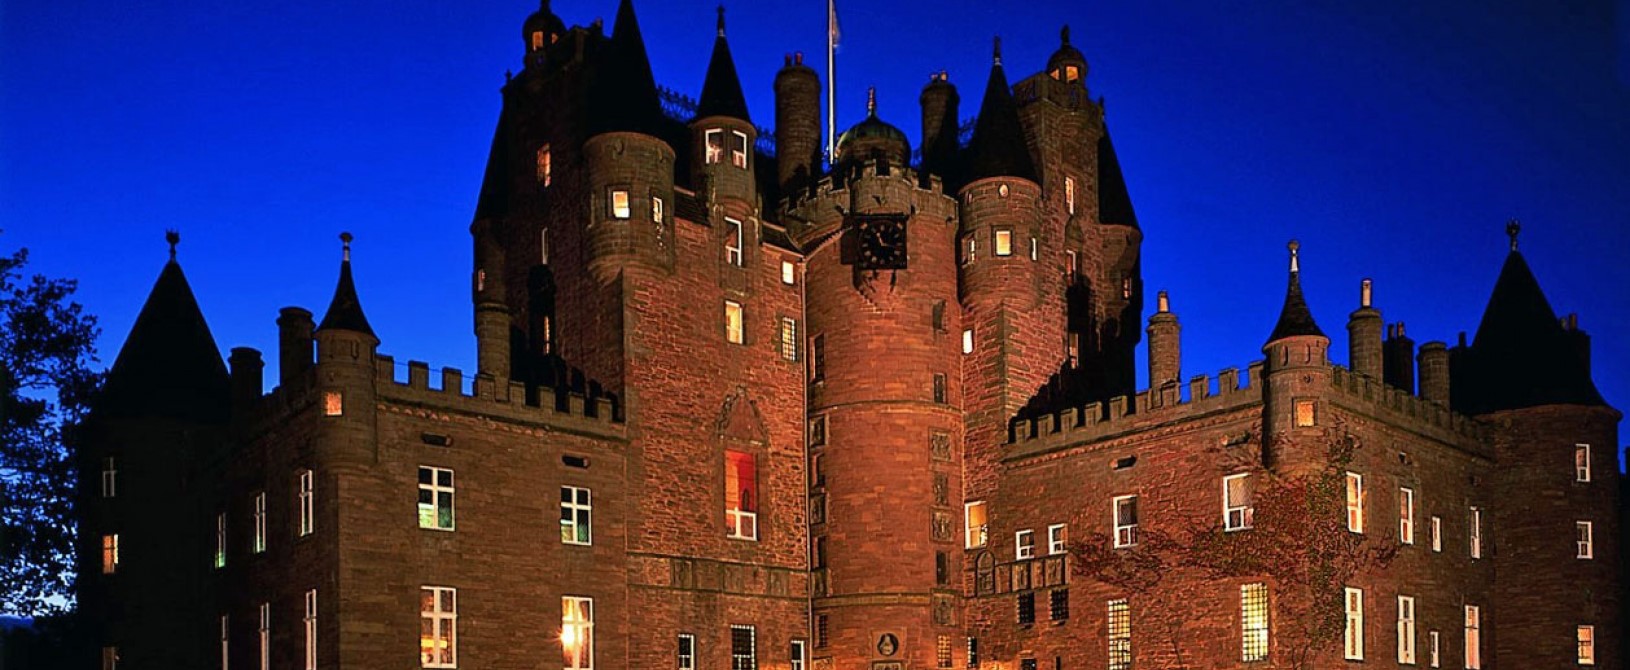 Glamis Castle, a royal residence since the 14th Century and childhood home to the Queen Mother